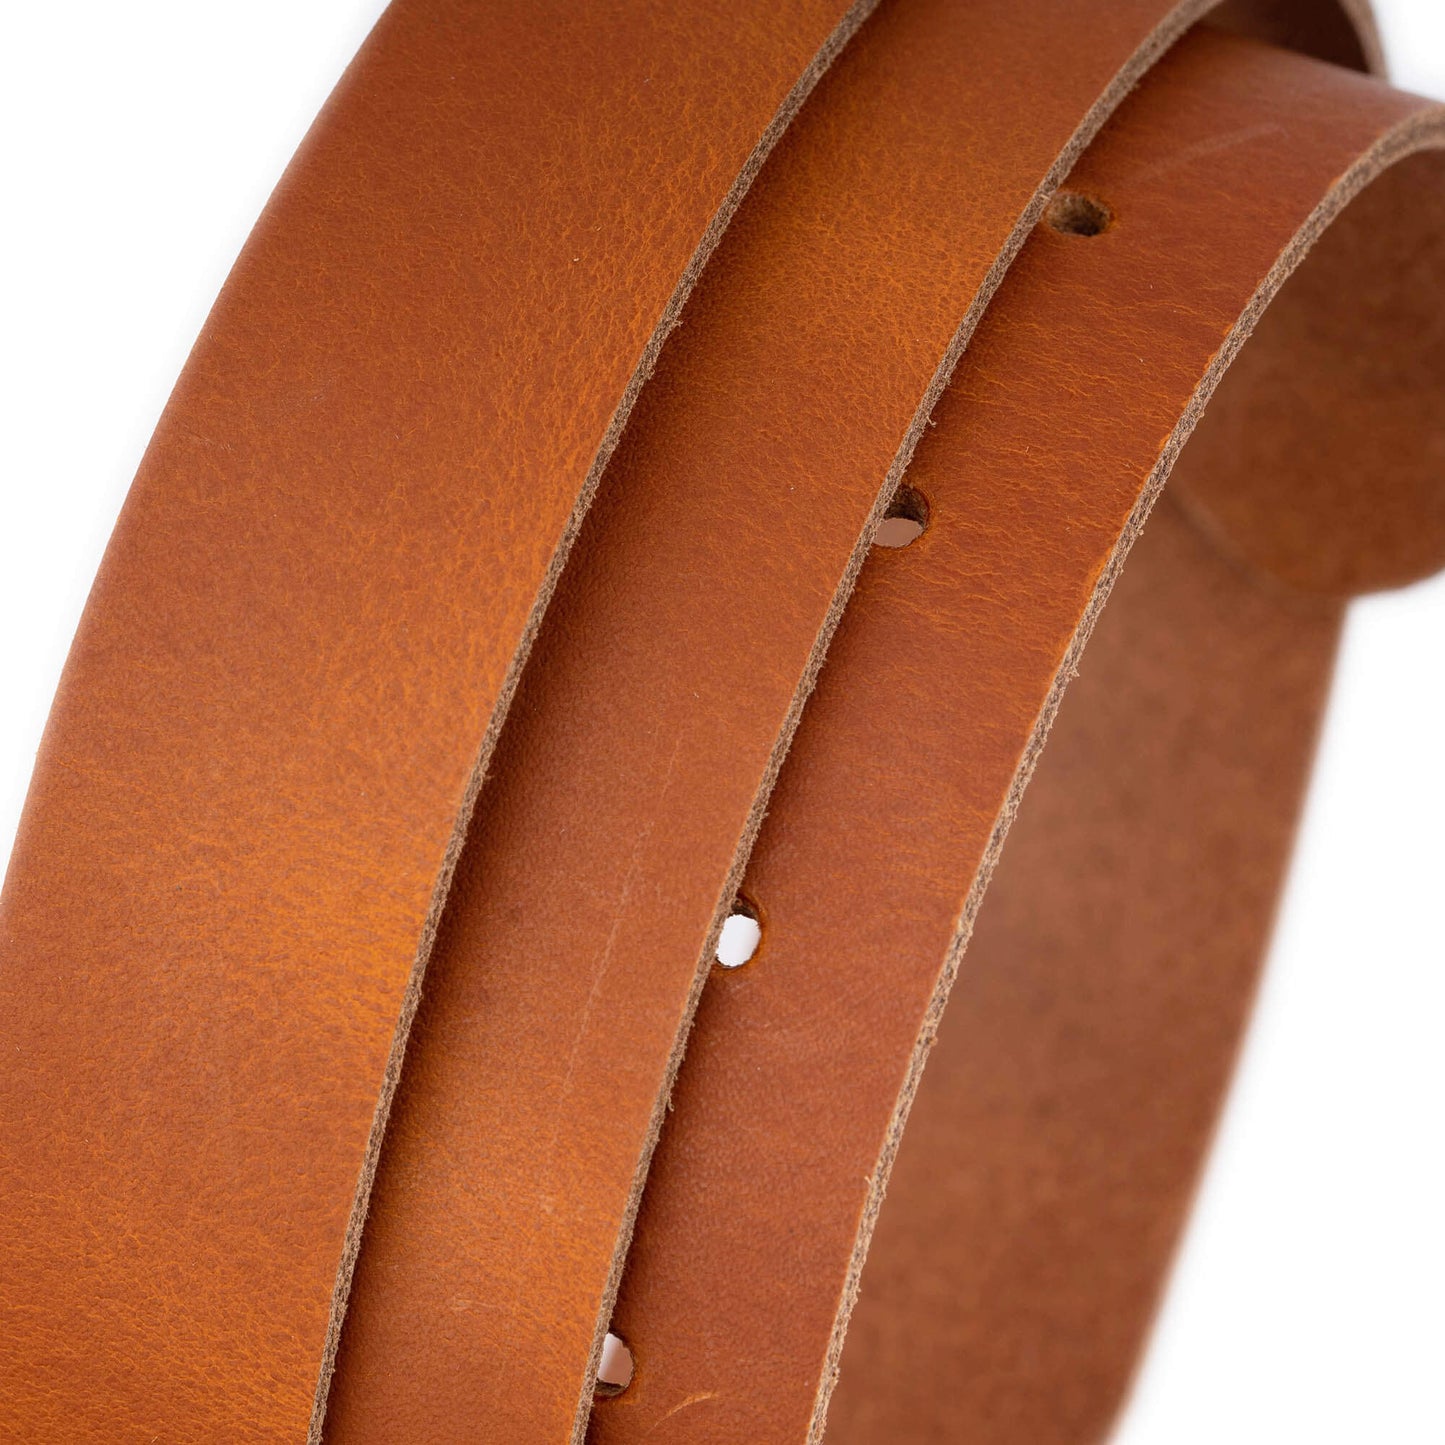 2.5 cm Cognac Leather Belt Strap For Dunhill Buckles Replacement